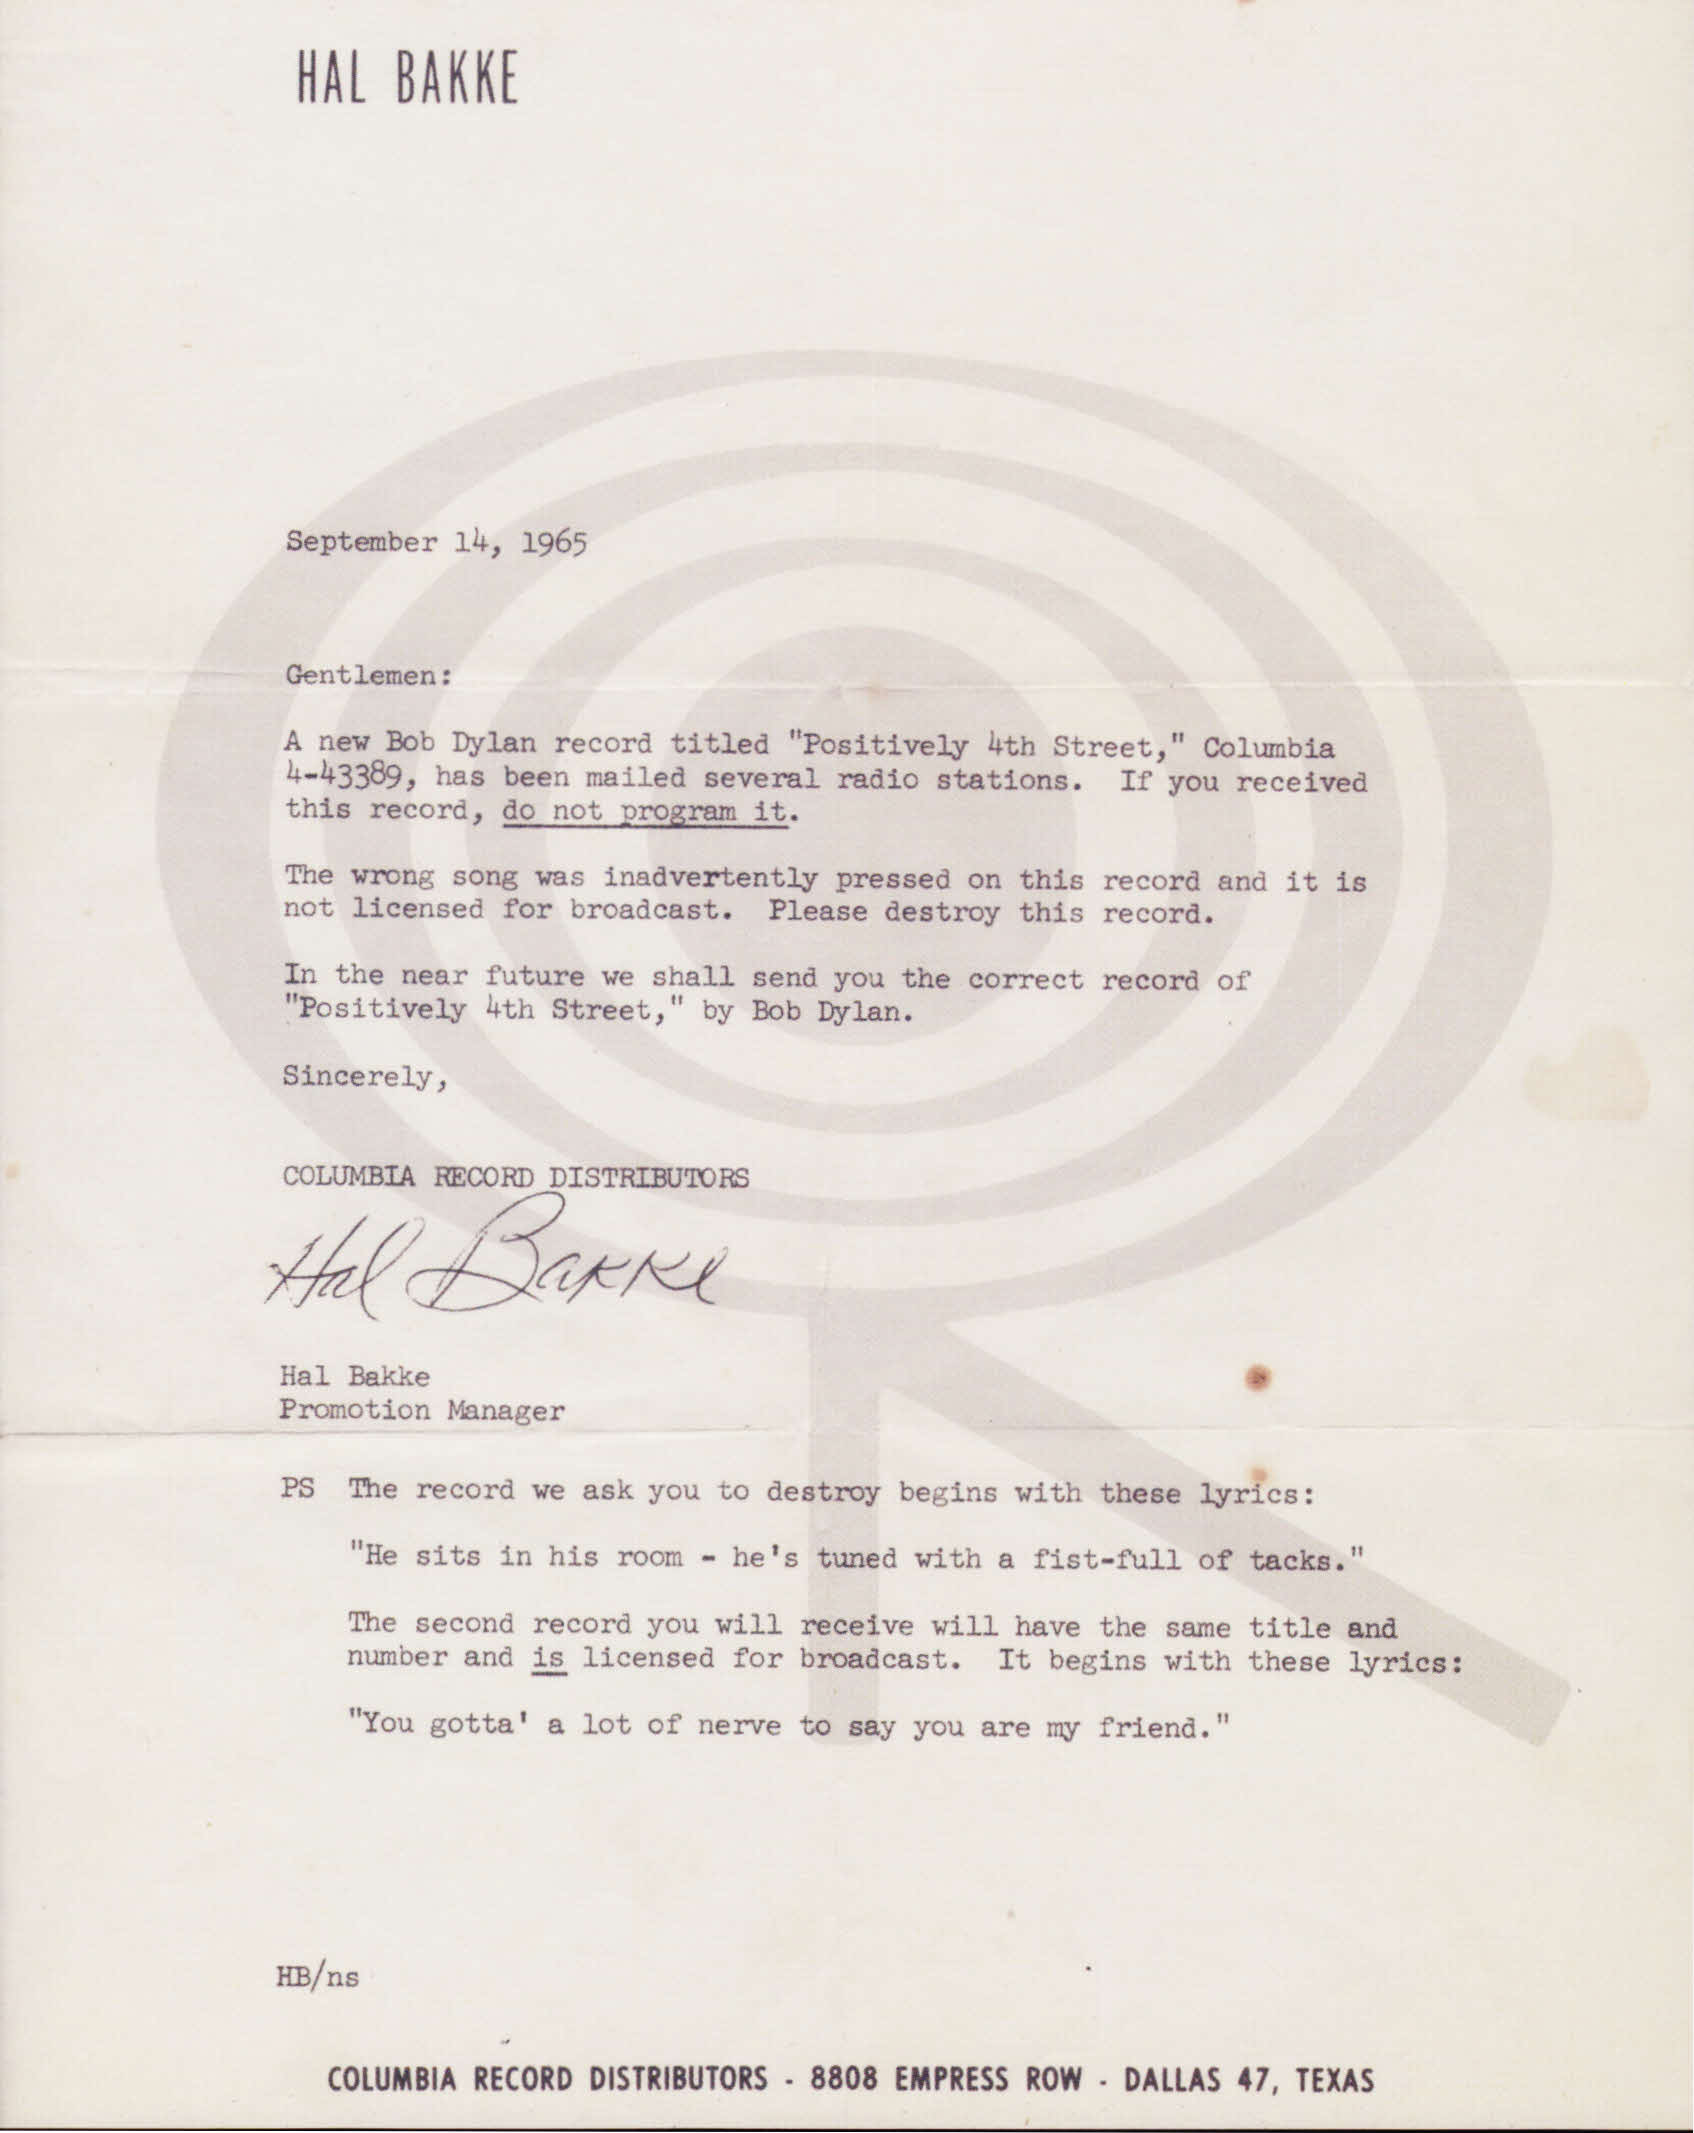 Columbia letter to radio stations, Sep 14, 1965